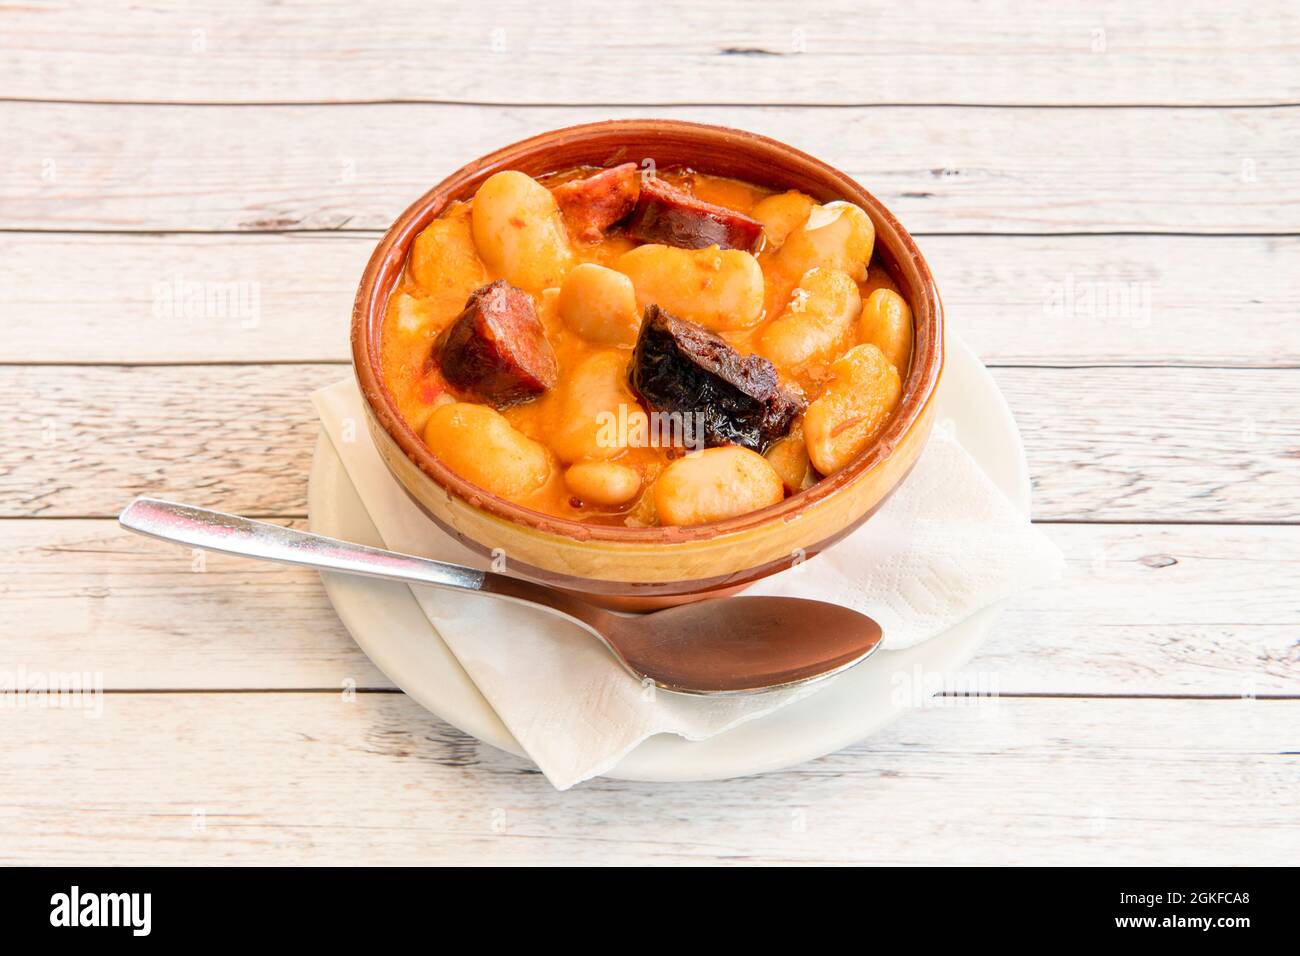 Earthenware bowl with spanish giant white bean stew recipe with pieces of cured pork, chorizo and black pudding with a spoon Stock Photo